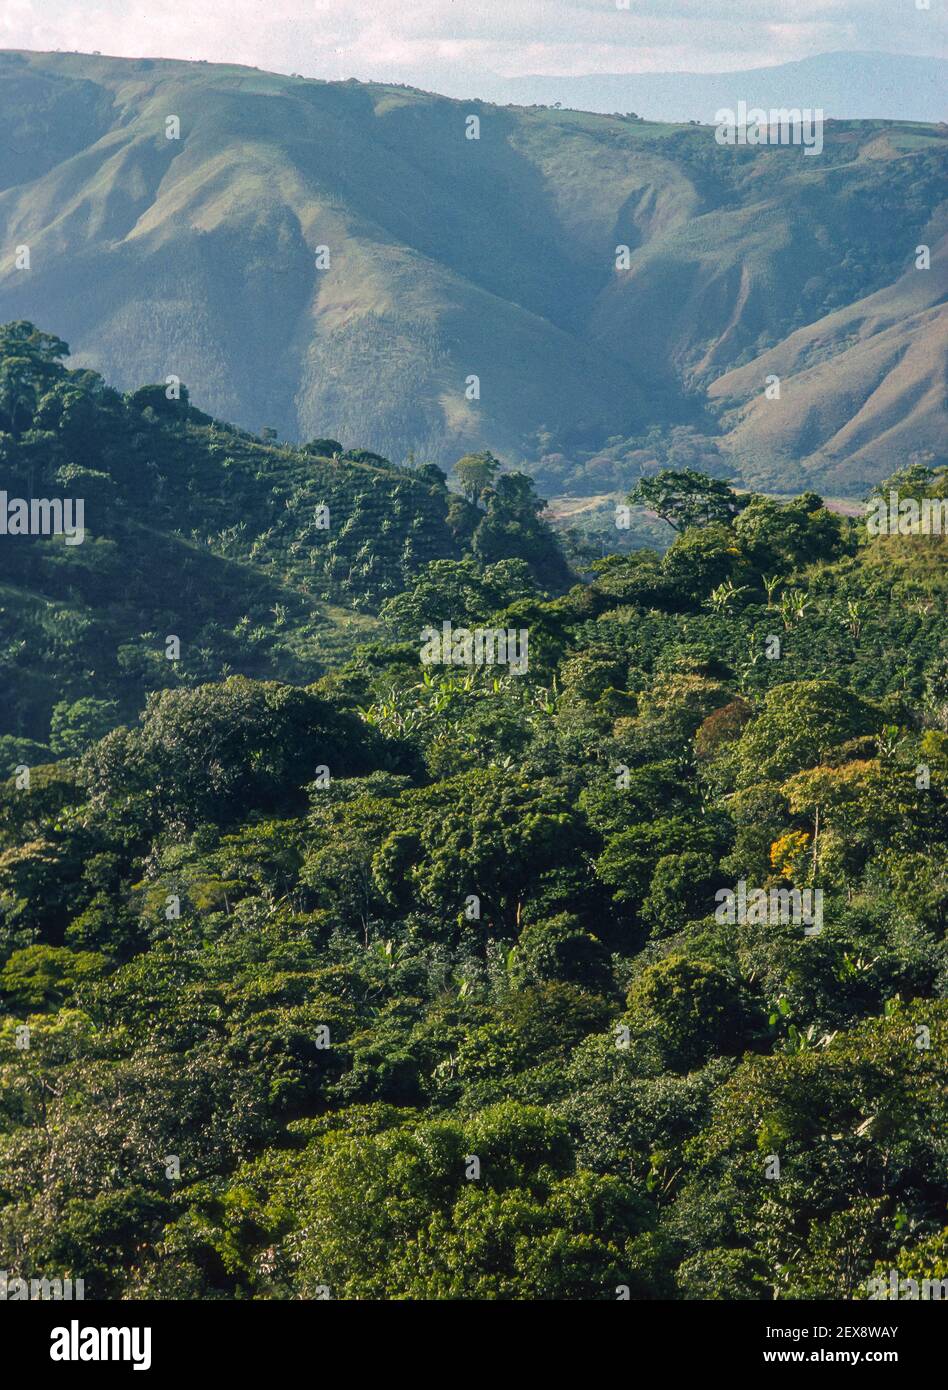 GUARICO, LARA STATE, VENEZUELA - Coffee growing region in Andes mountains. Stock Photo